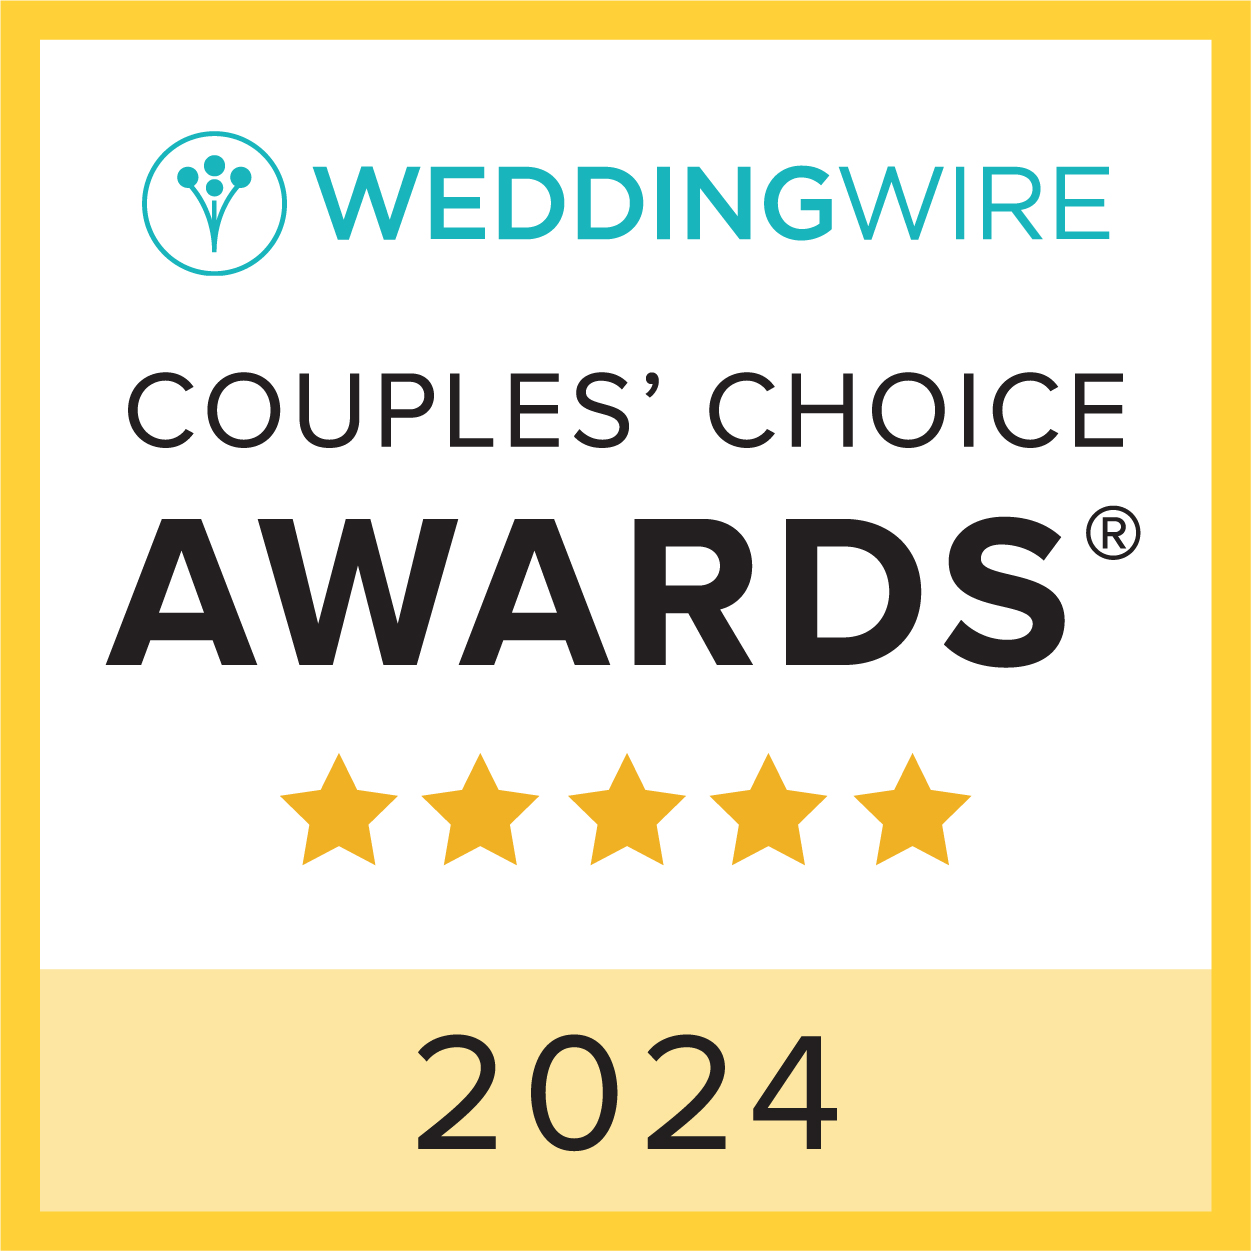 wedding wire couples choice awards 2024